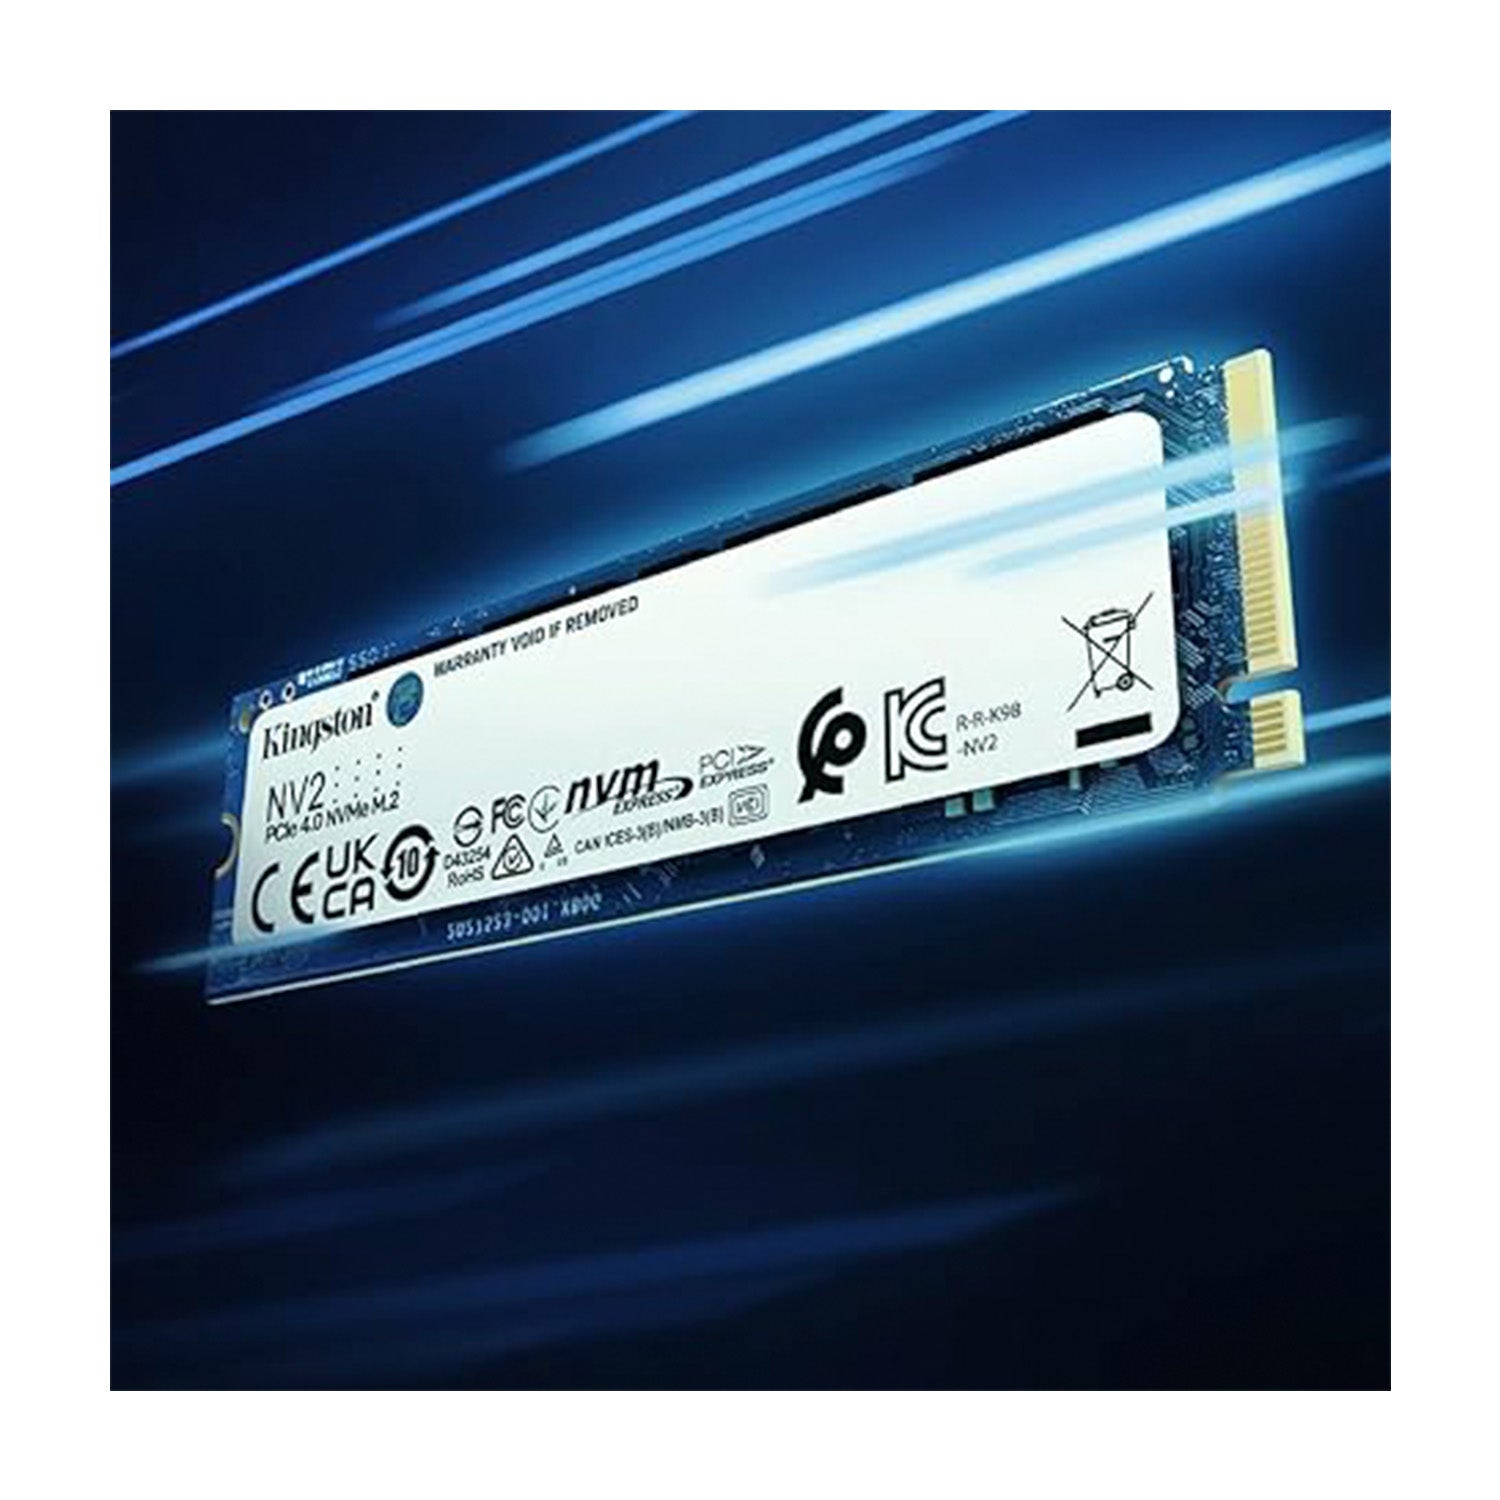 Kingston NV2 1TB M.2 2280 NVMe (Solid State Drive) - High-Performance Storage PCIe 4.0 Internal SSD for Desktop and Laptop Up to 2100 MB/s (SNV2S/1000G)